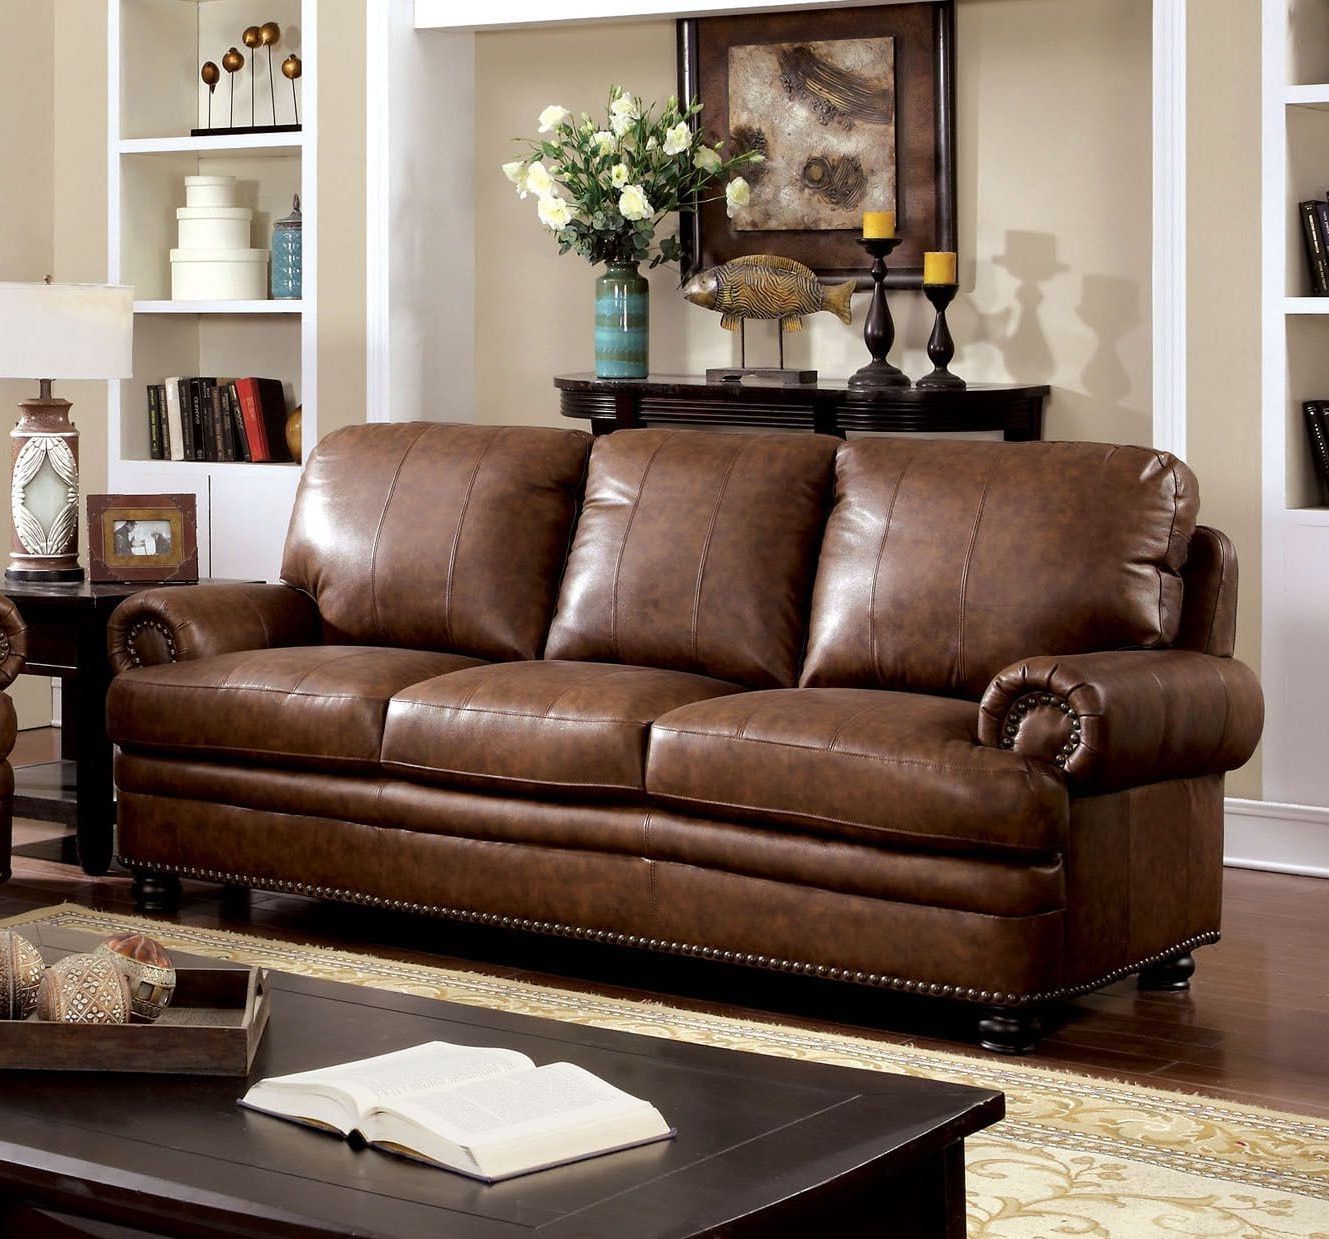 Latest Cm6318 Sf Dark Brown Top Grain Leather Match Sofa Couch – Luchy Amor Pertaining To Top Grain Leather Loveseats (View 8 of 15)